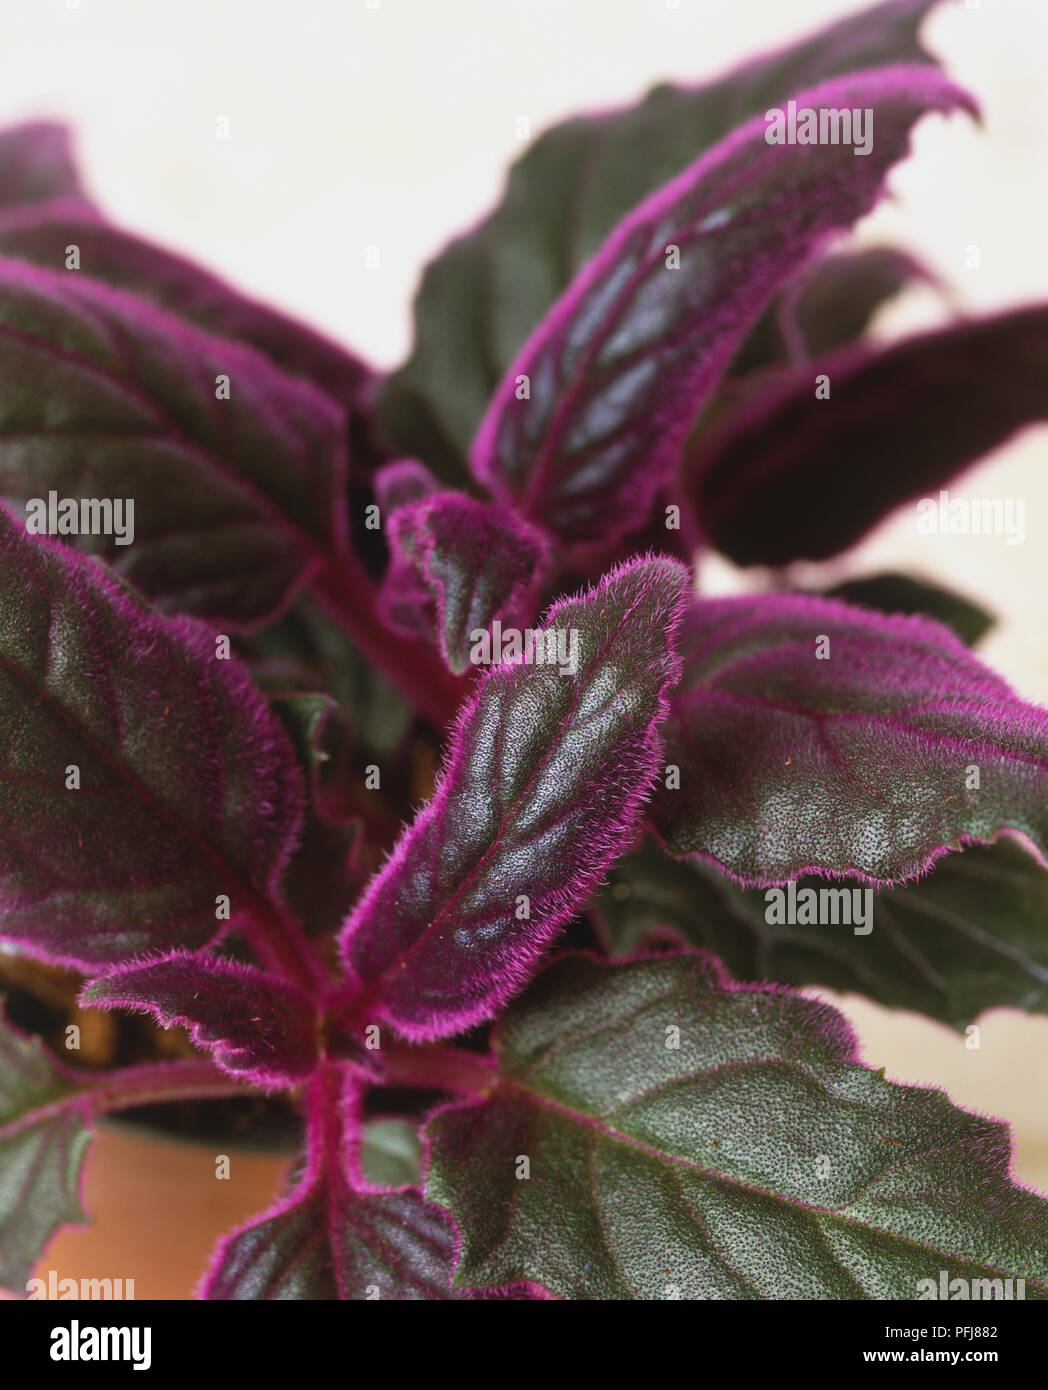 Gynura aurantiaca, Purple Velvet Plant, toothed and curled leaves with covering of fine purple hairs, close-up. Stock Photo